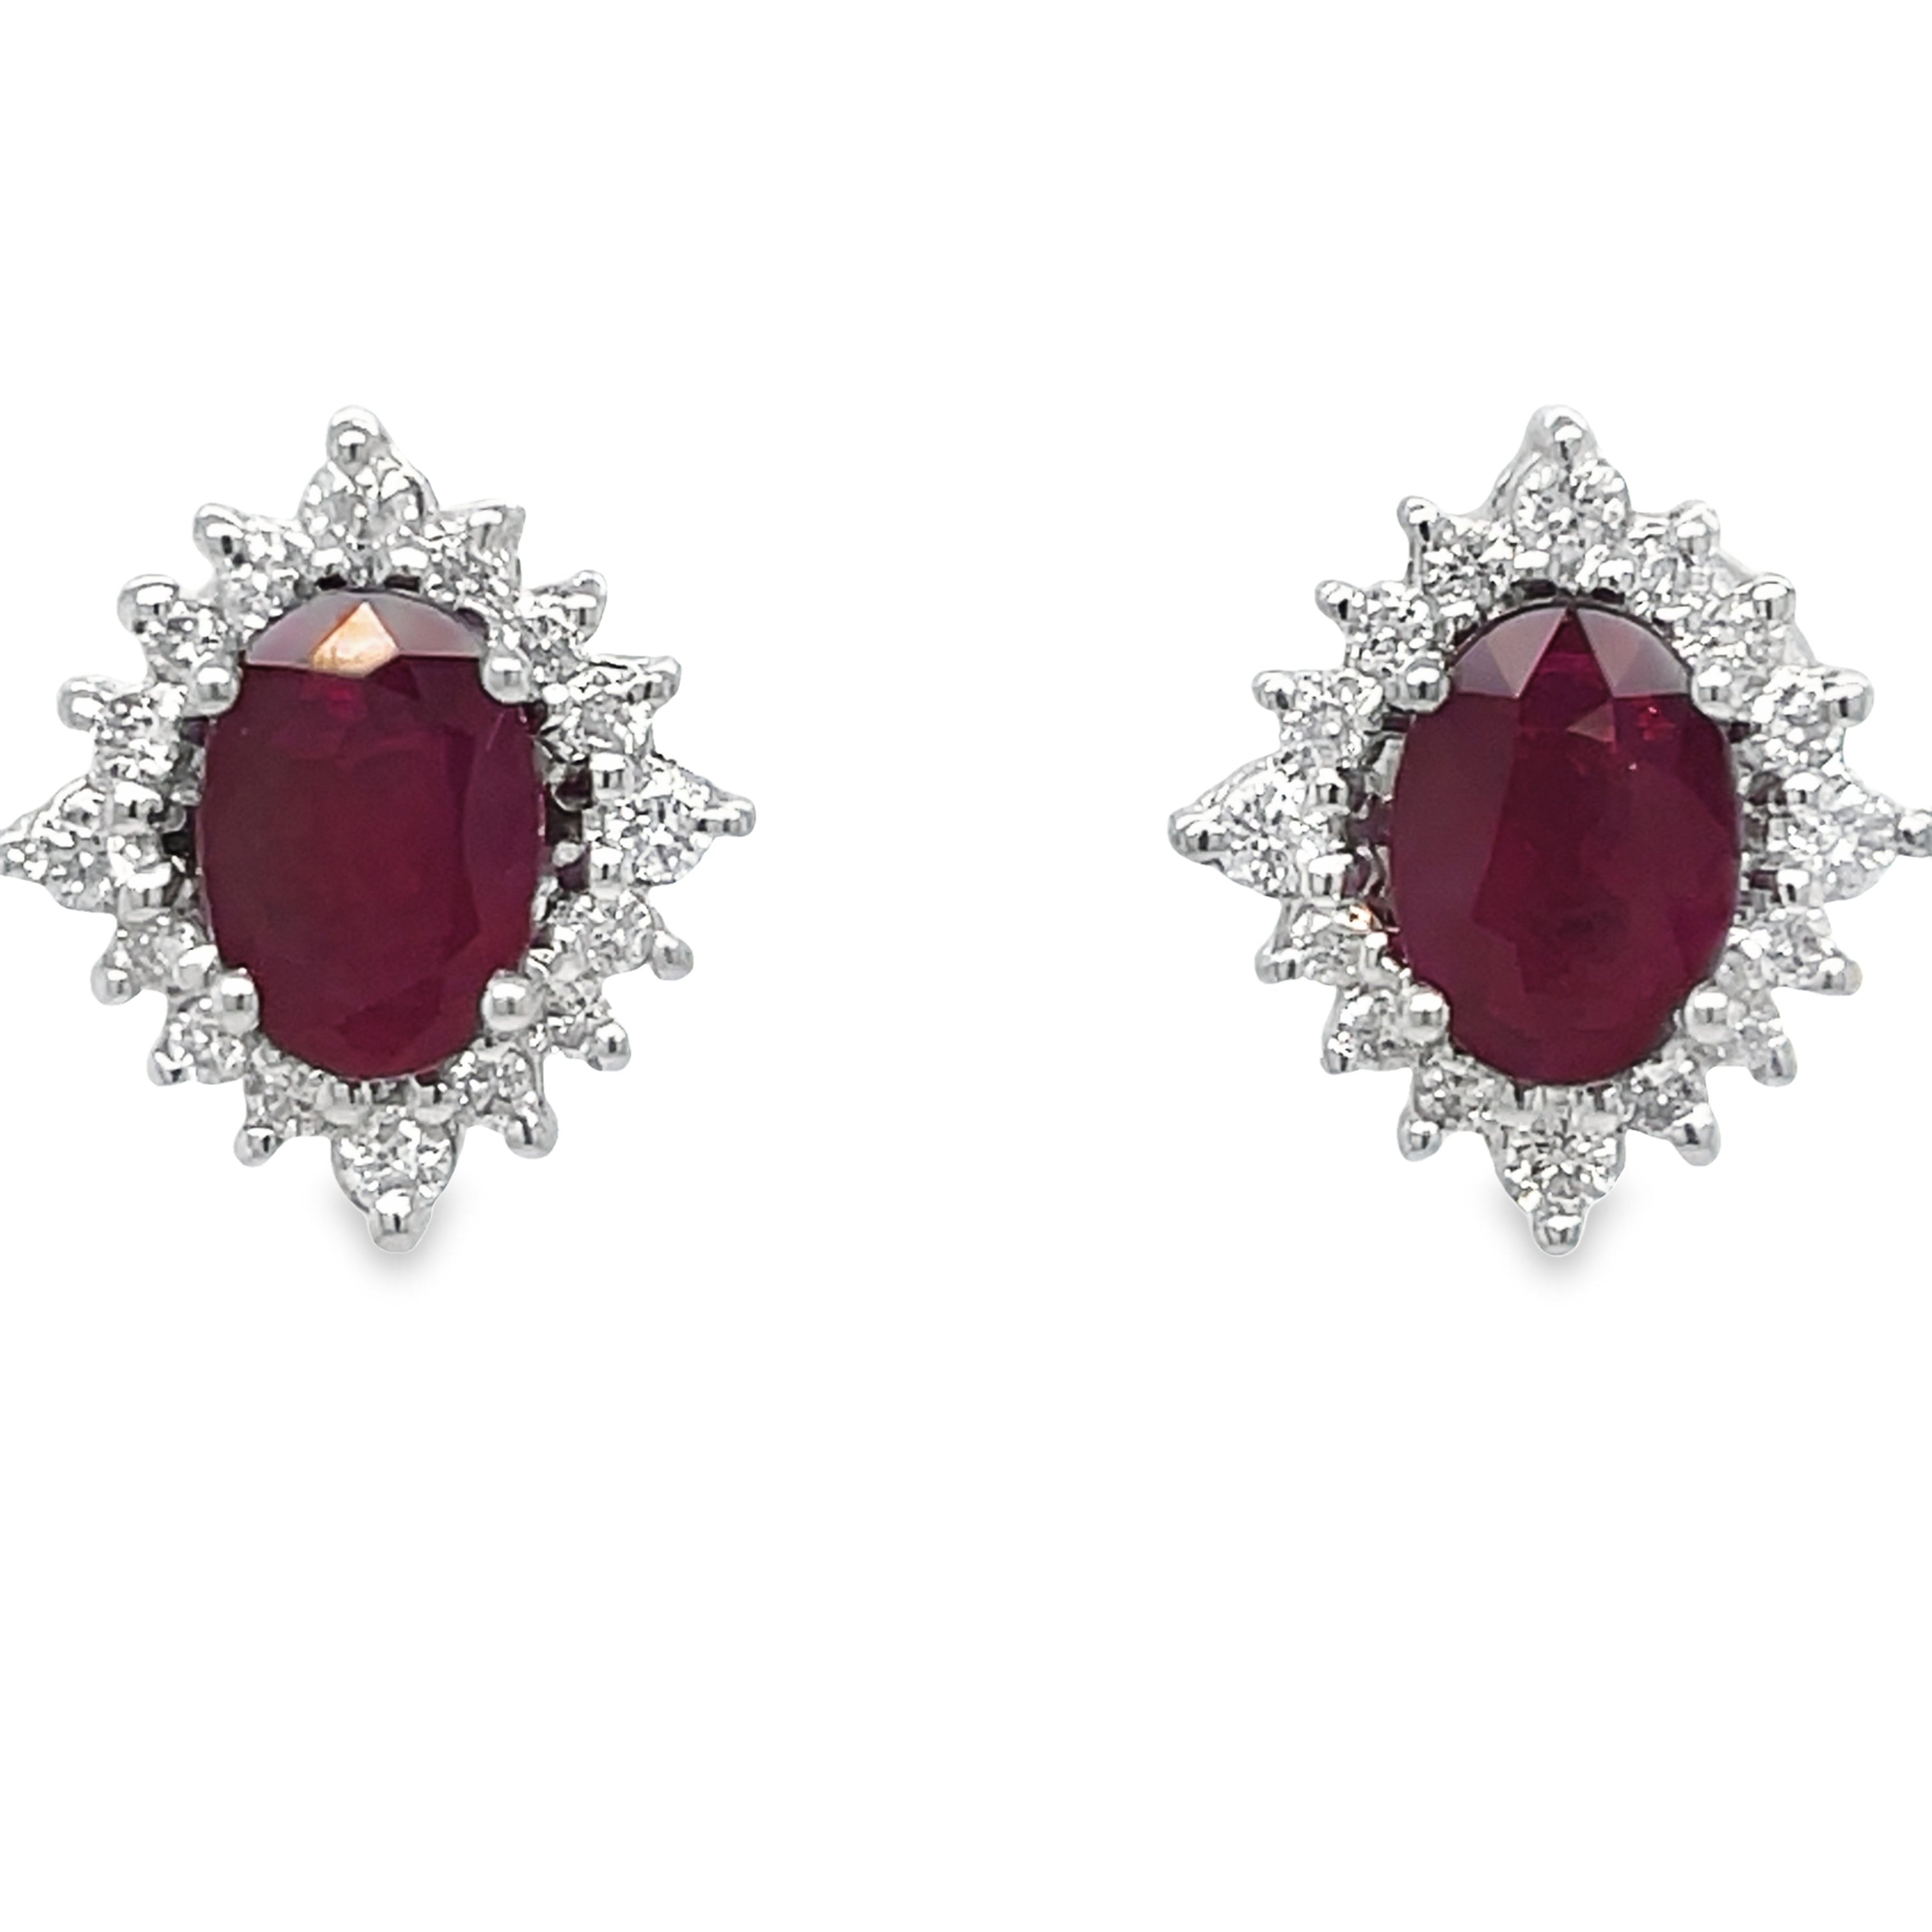 These elegant earrings feature oval-shaped rubies and round diamonds, set in 18k white gold. Measuring 12.00 x 10.00 mm, they make a stunning addition to any jewelry collection. The rubies add a touch of color while the diamonds bring a brilliant sparkle, making these earrings perfect for any occasion.